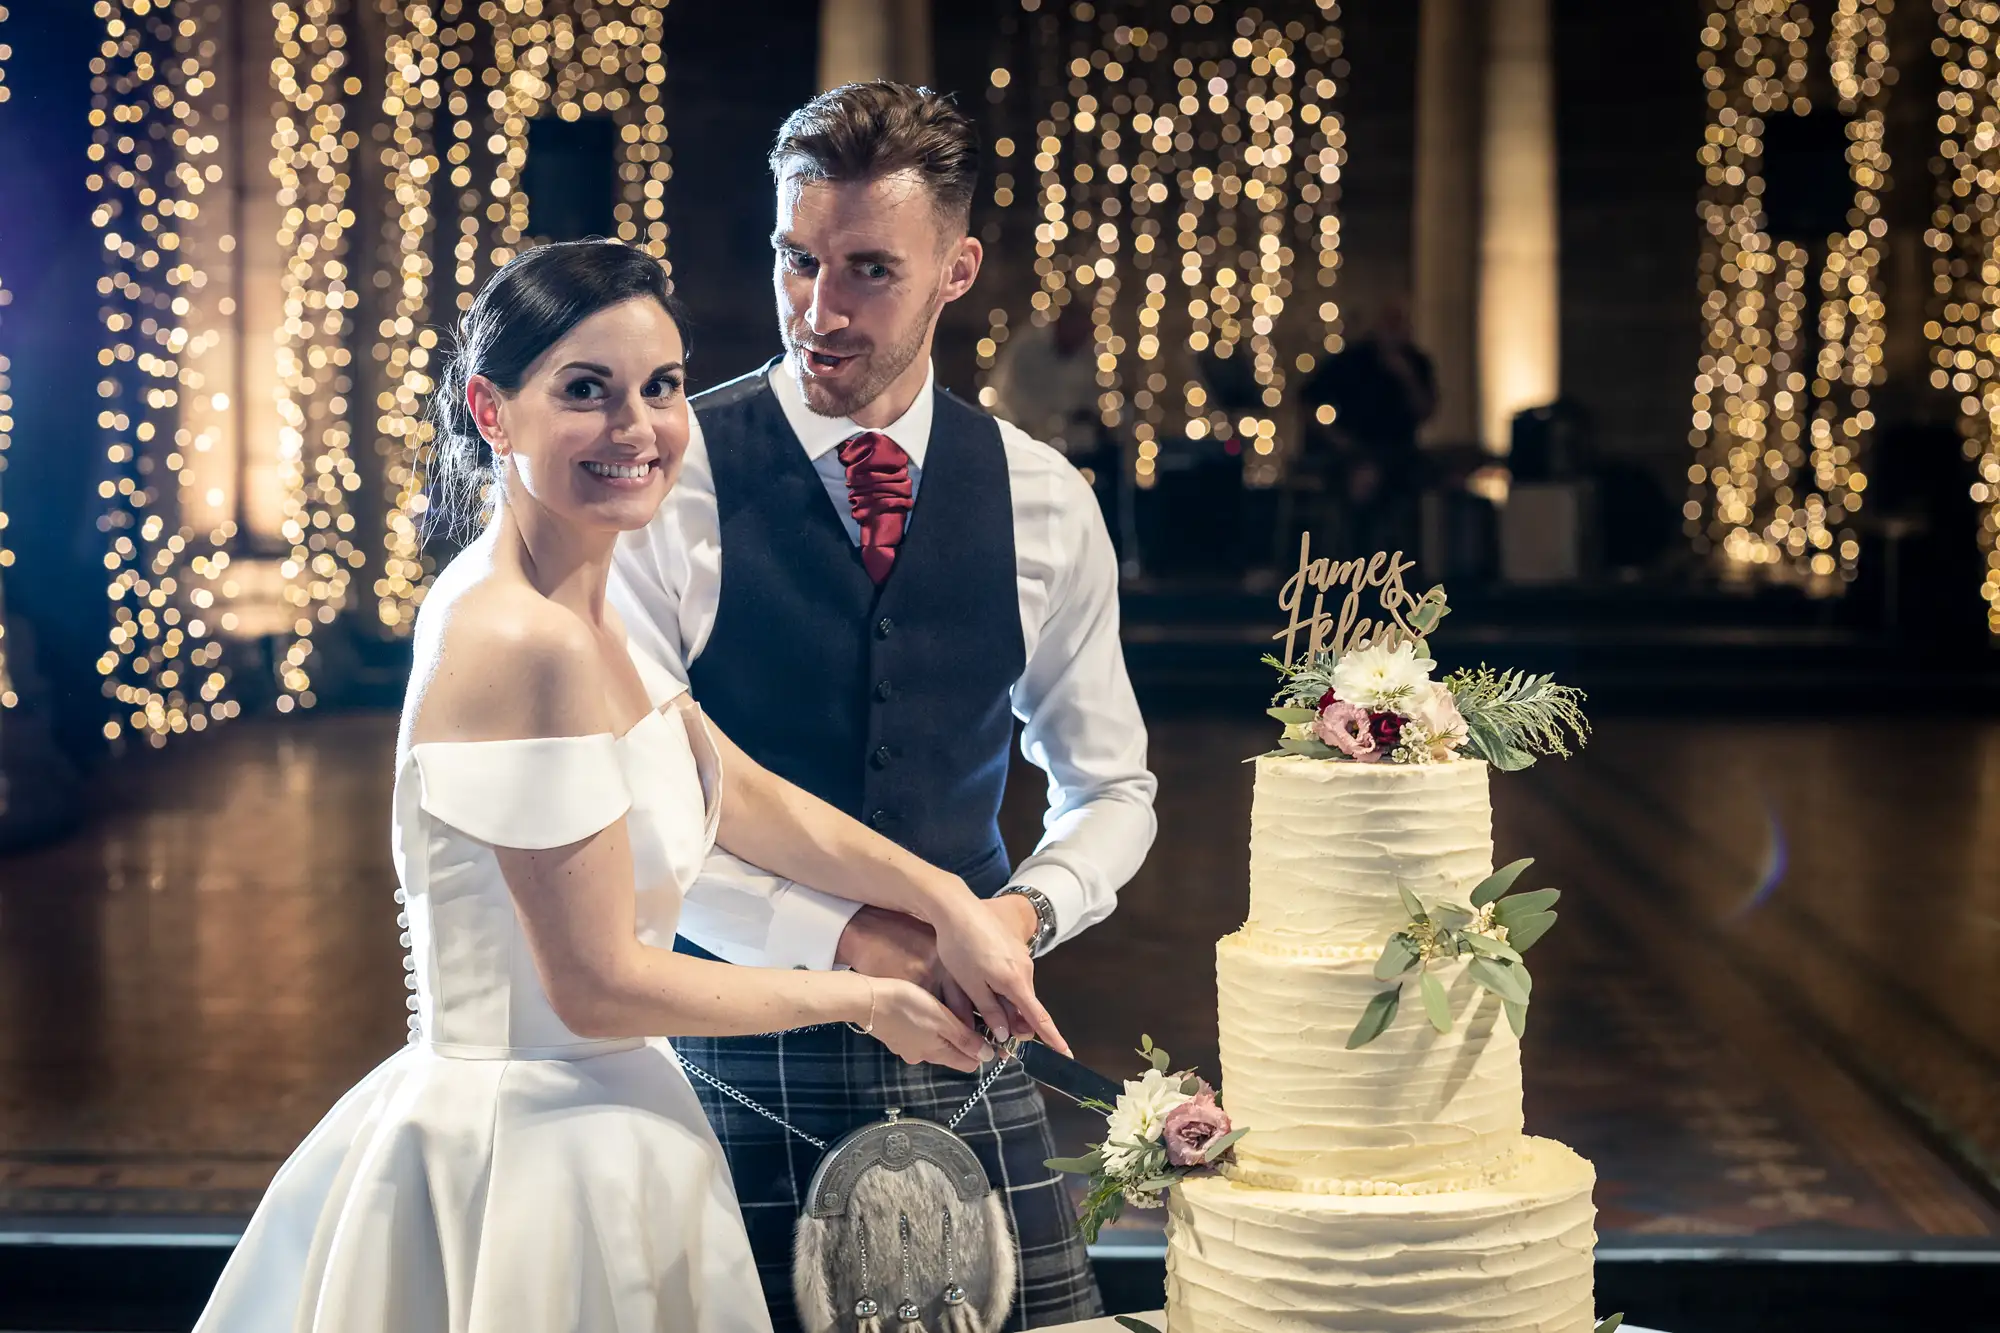 A bride and groom cut a wedding cake together in a hall decorated with fairy lights, looking at the camera with smiles.